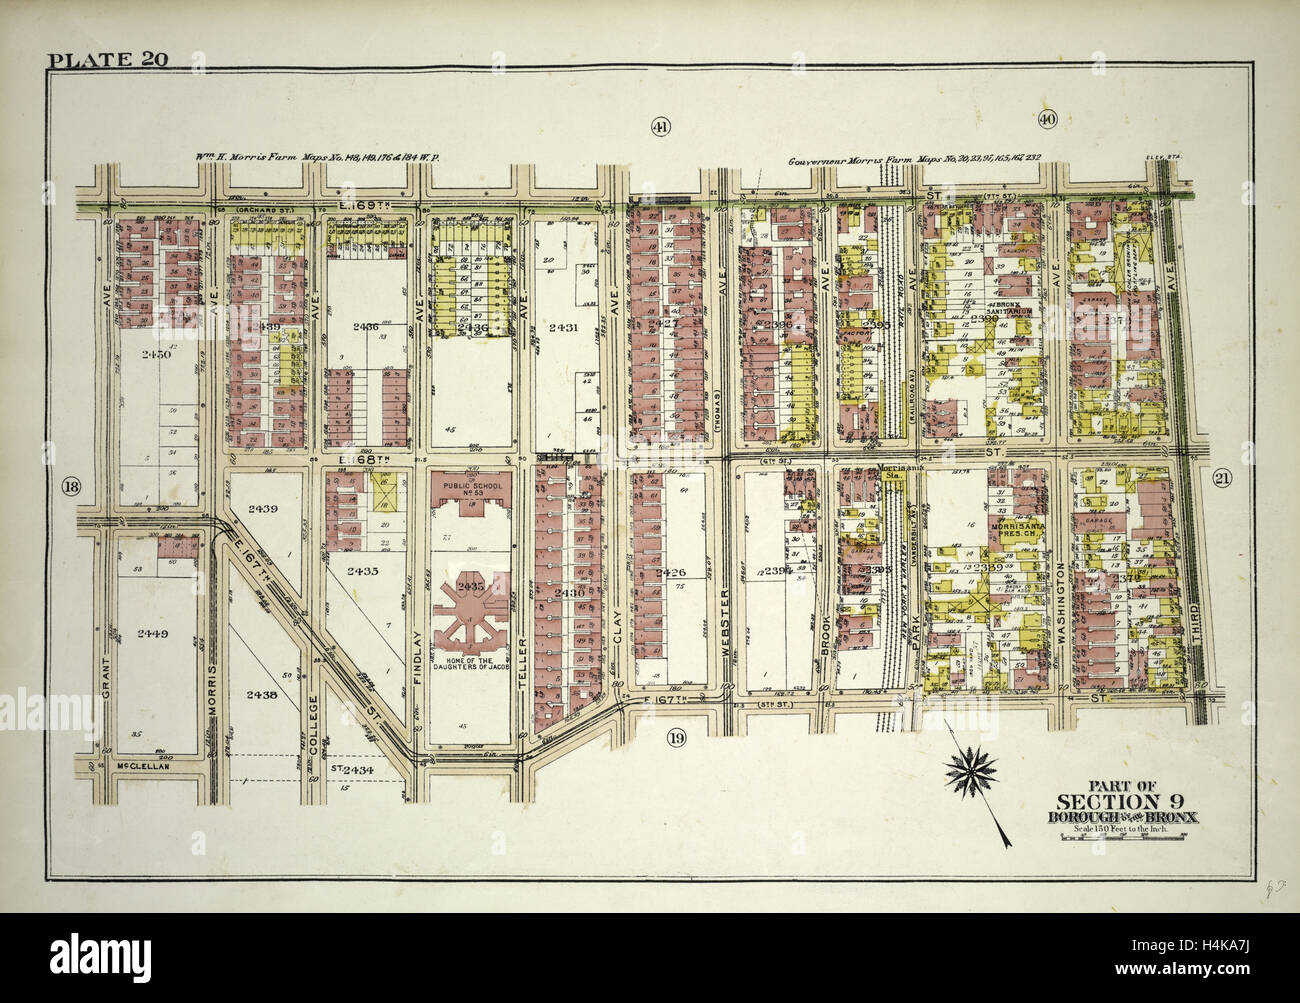 Plate 20, Part of Section 9, Borough of the Bronx. Bounded by E. 169th Street, Third Avenue, E. 167th Street and Grant Avenue Stock Photo